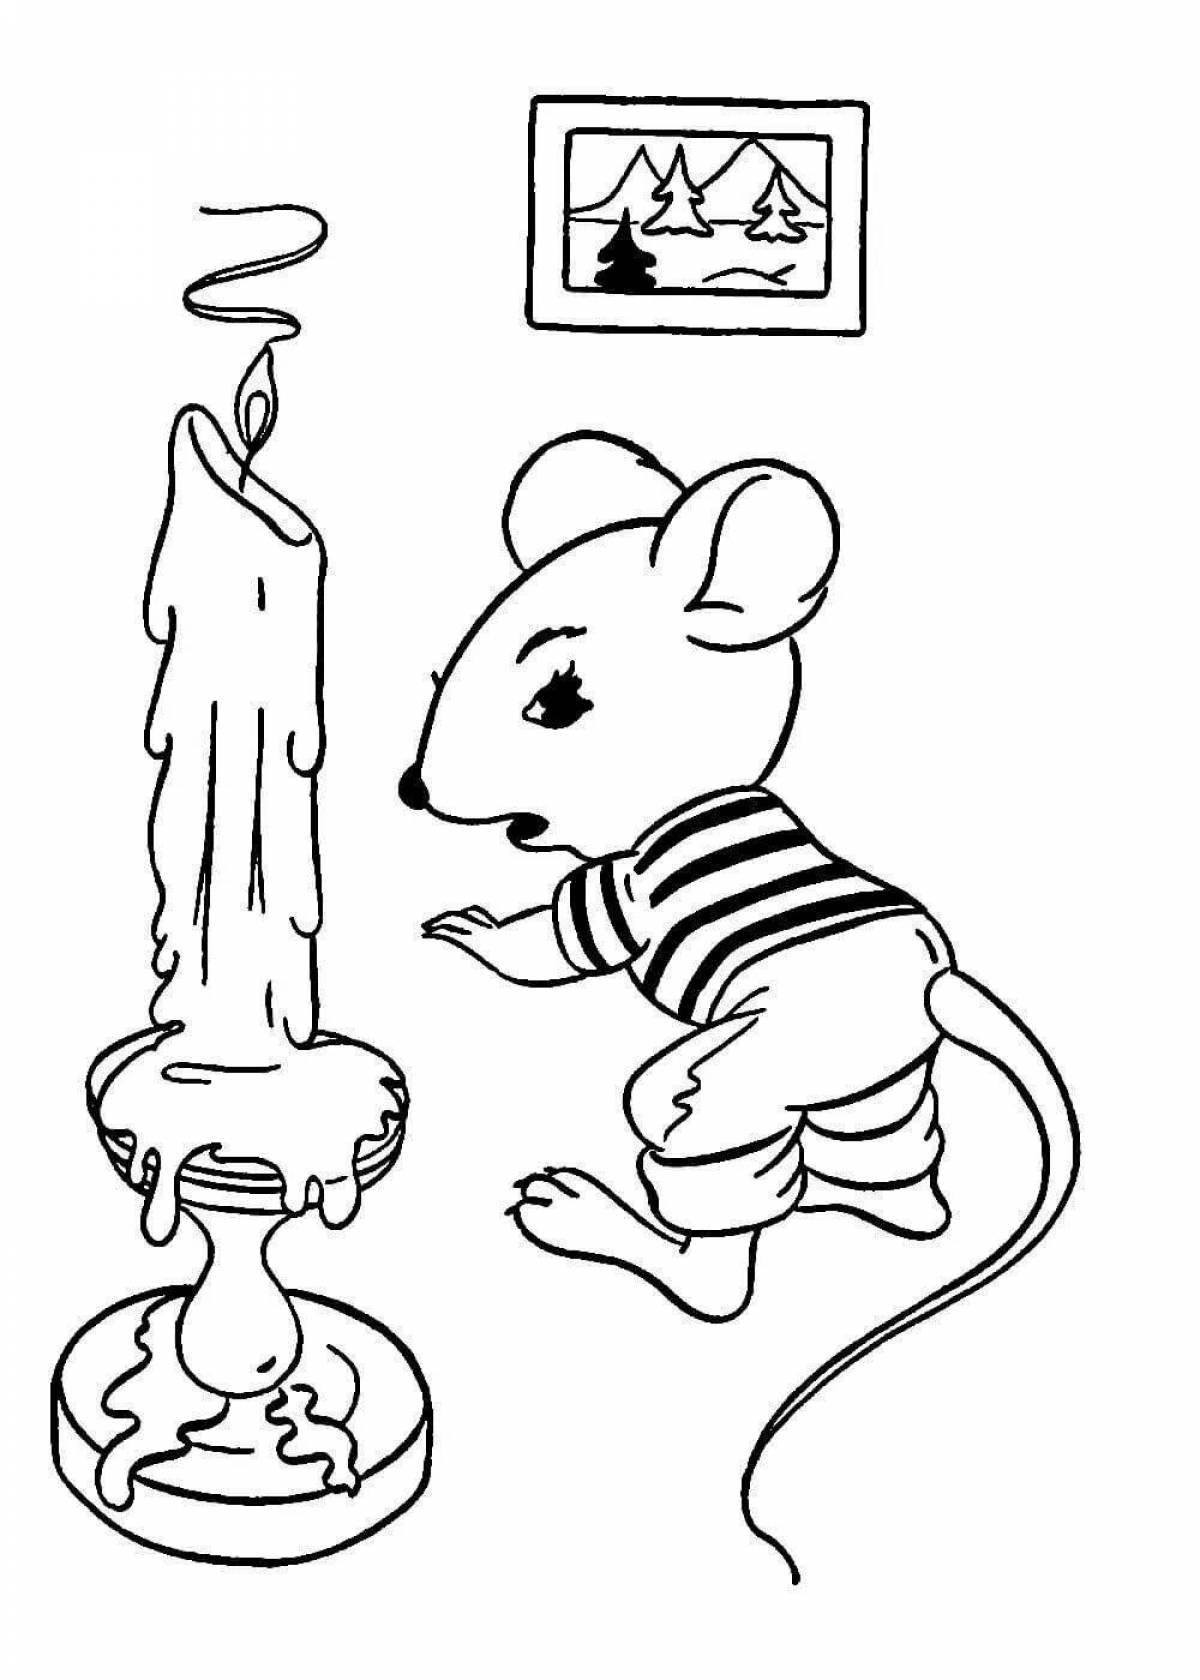 Fun coloring tale of the silly mouse